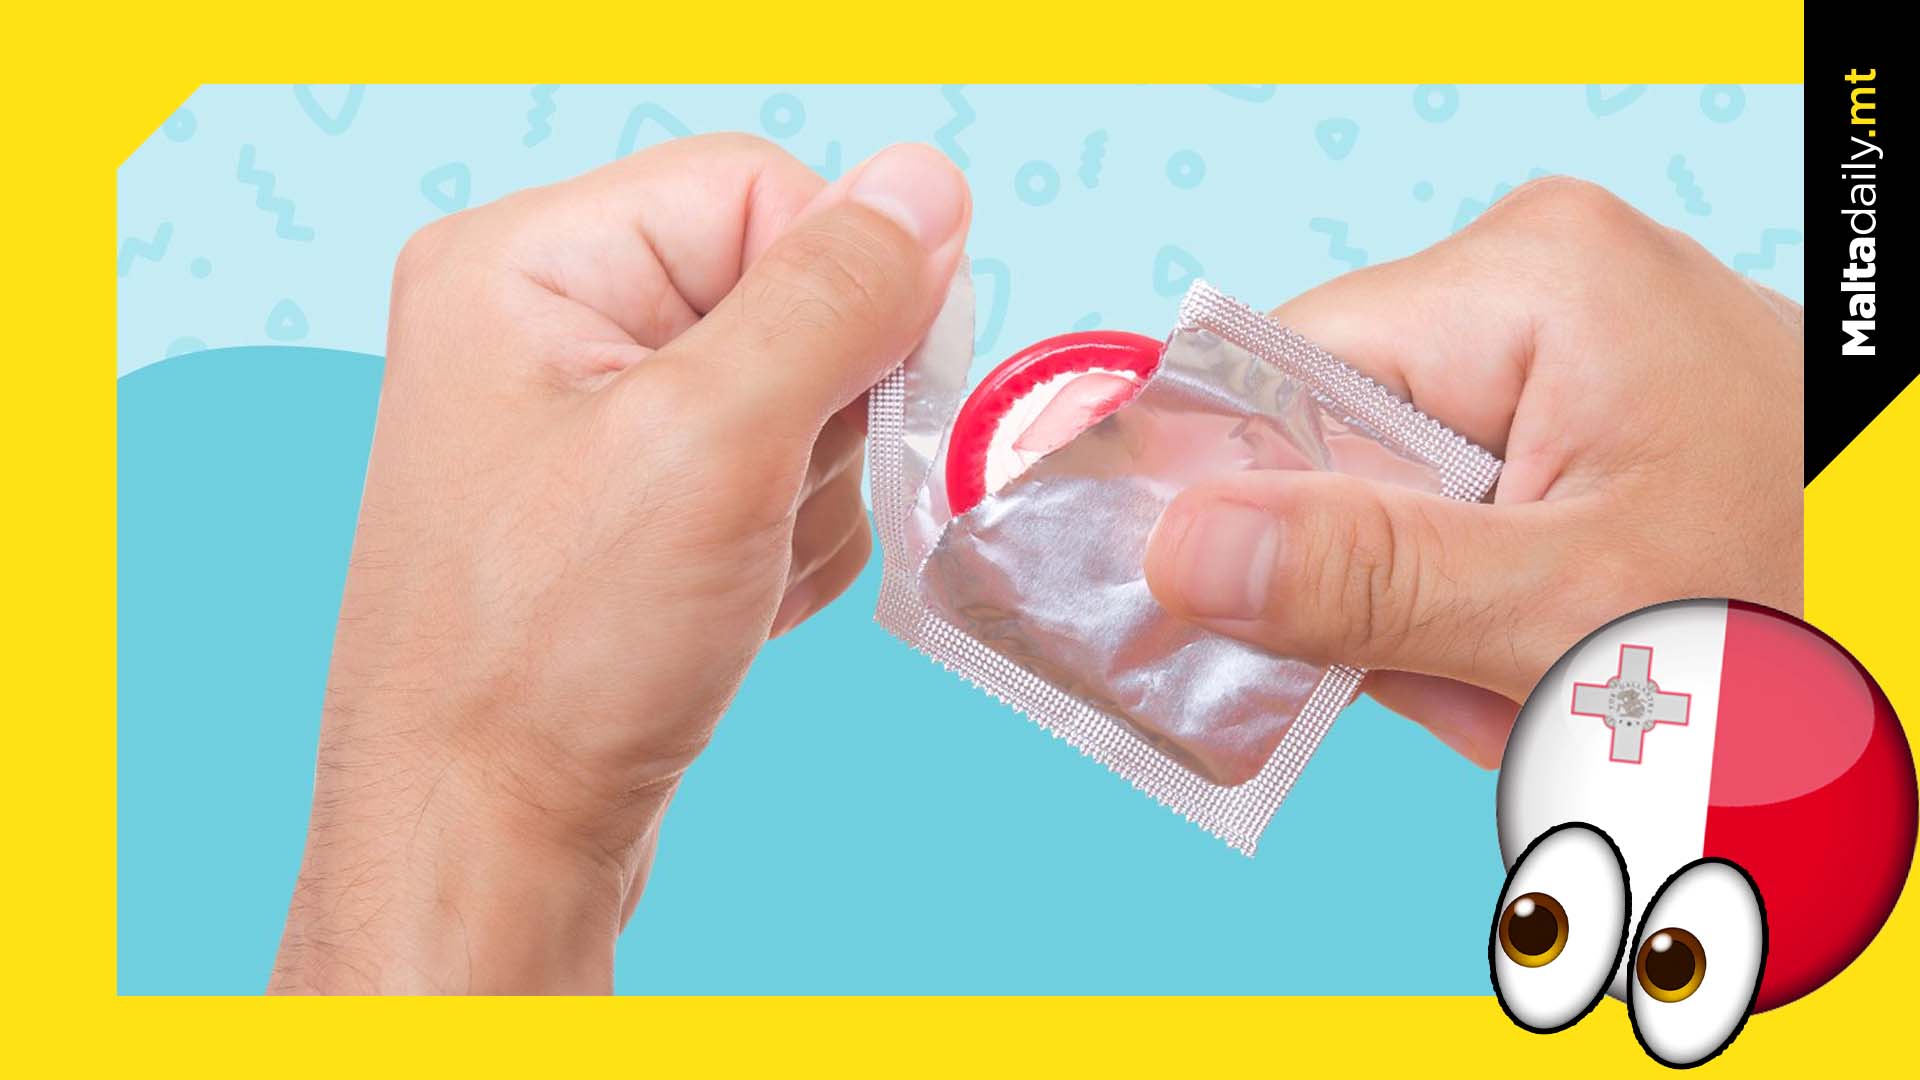 Around half of 18 to 25 year olds use contraceptives in Malta